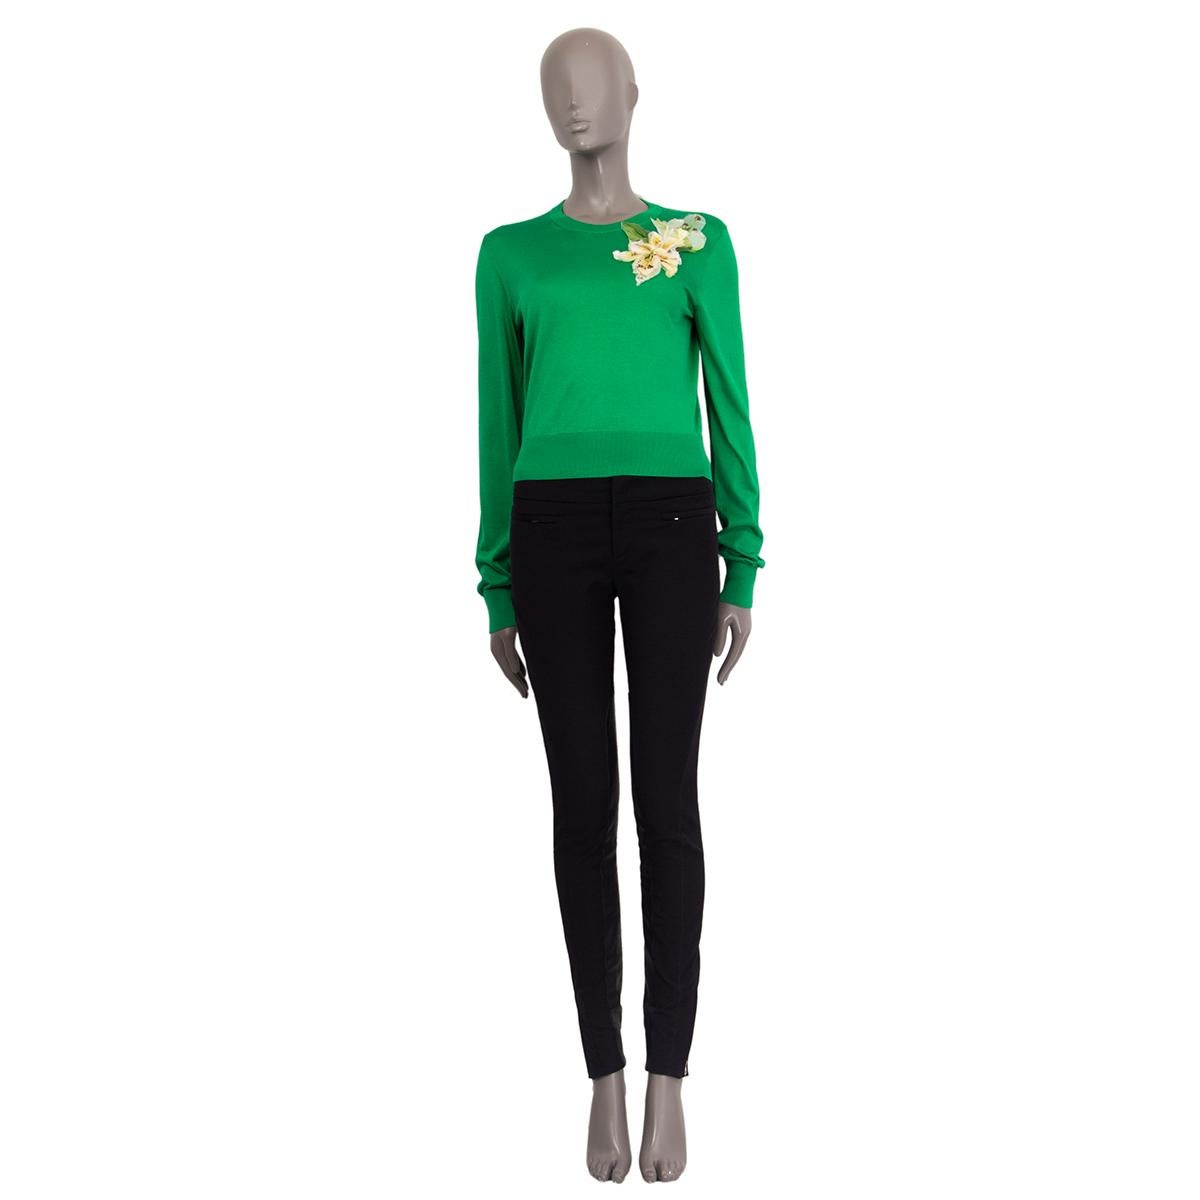 100% authentic Dolce & Gabbana crewneck sweater in apple green silk (100%) - content tag has been removed - with sequin embellished flower appliquee. Has been worn and is in excellent condition.

Measurements
Tag Size	42
Size	M
Shoulder Width	40cm